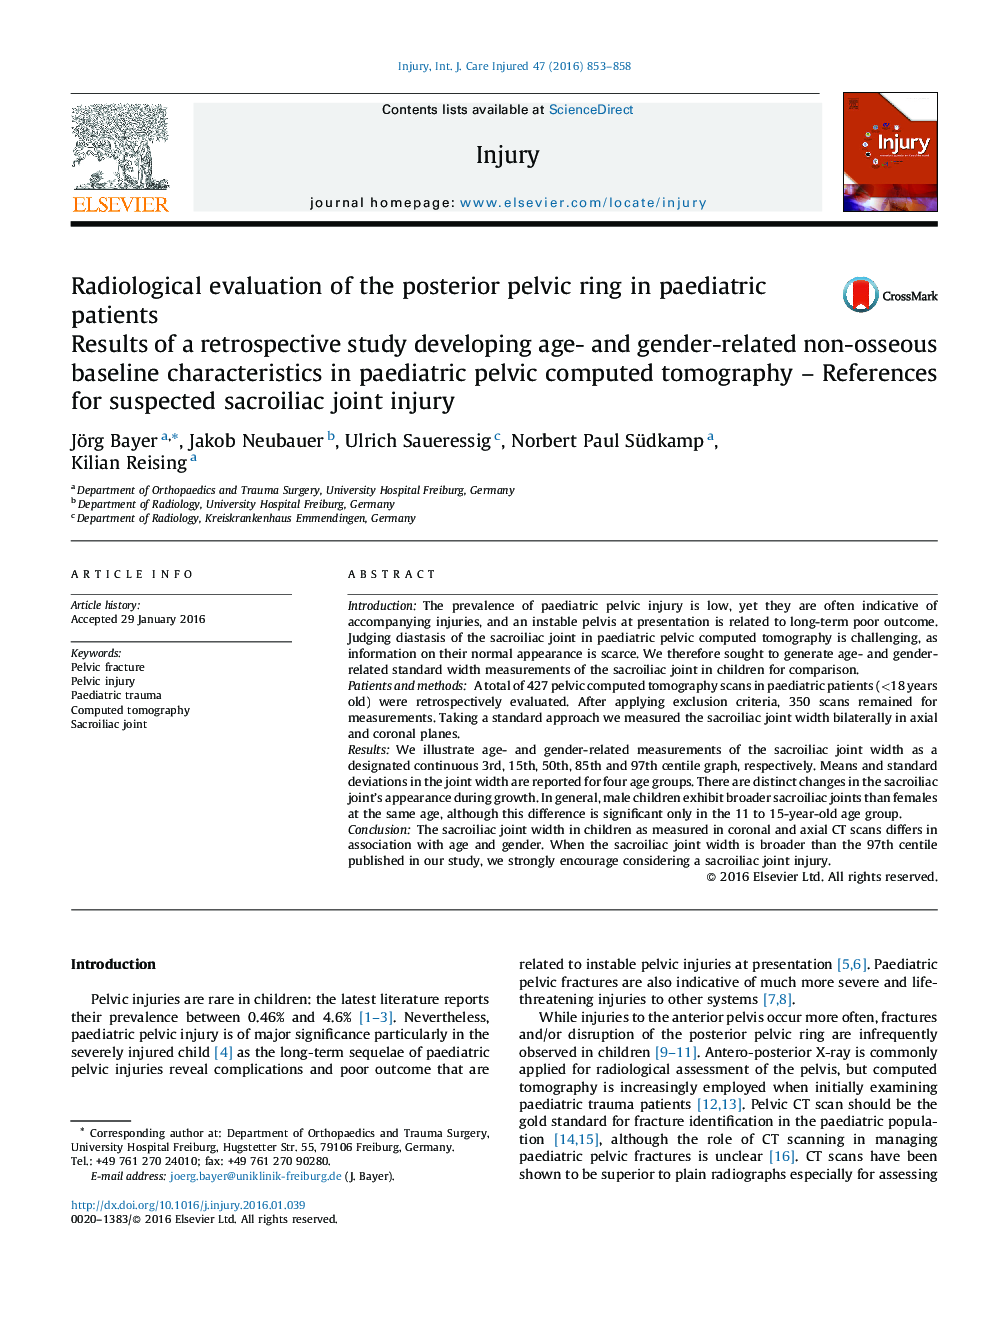 Radiological evaluation of the posterior pelvic ring in paediatric patients: Results of a retrospective study developing age- and gender-related non-osseous baseline characteristics in paediatric pelvic computed tomography – References for suspected sacro